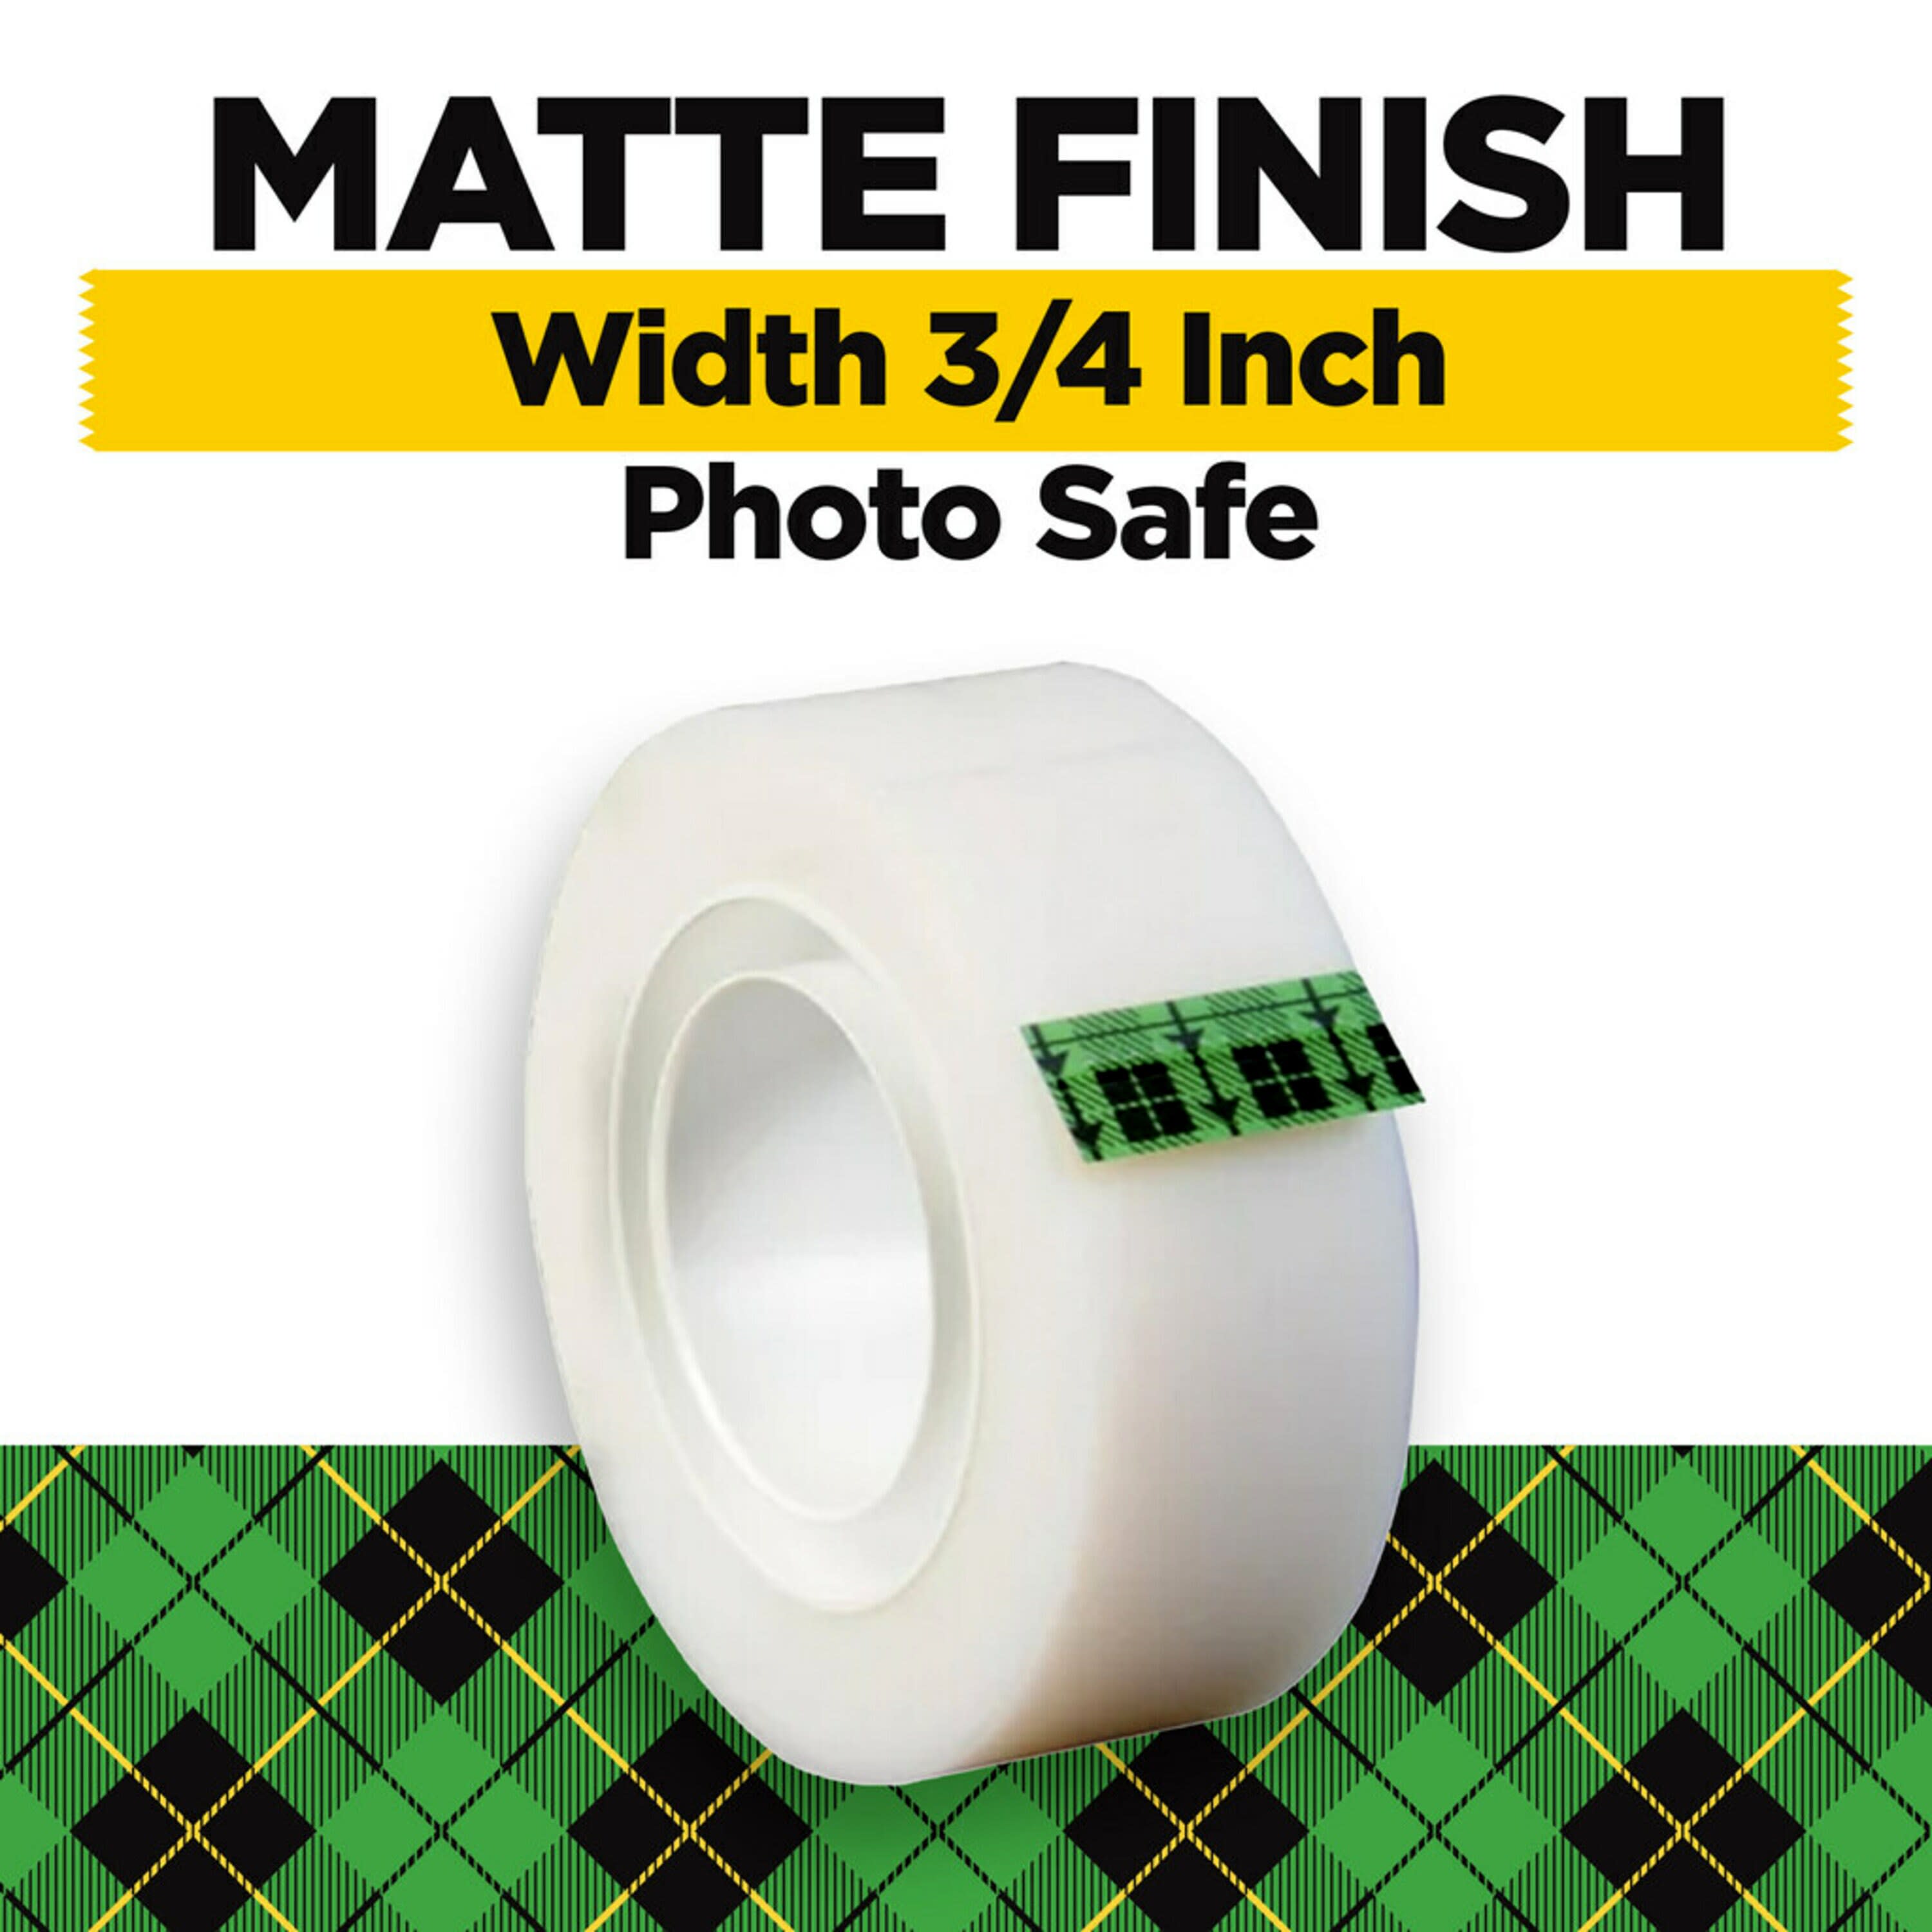 Scotch Magic Tape, Invisible, 20 Tape Rolls - image 3 of 18